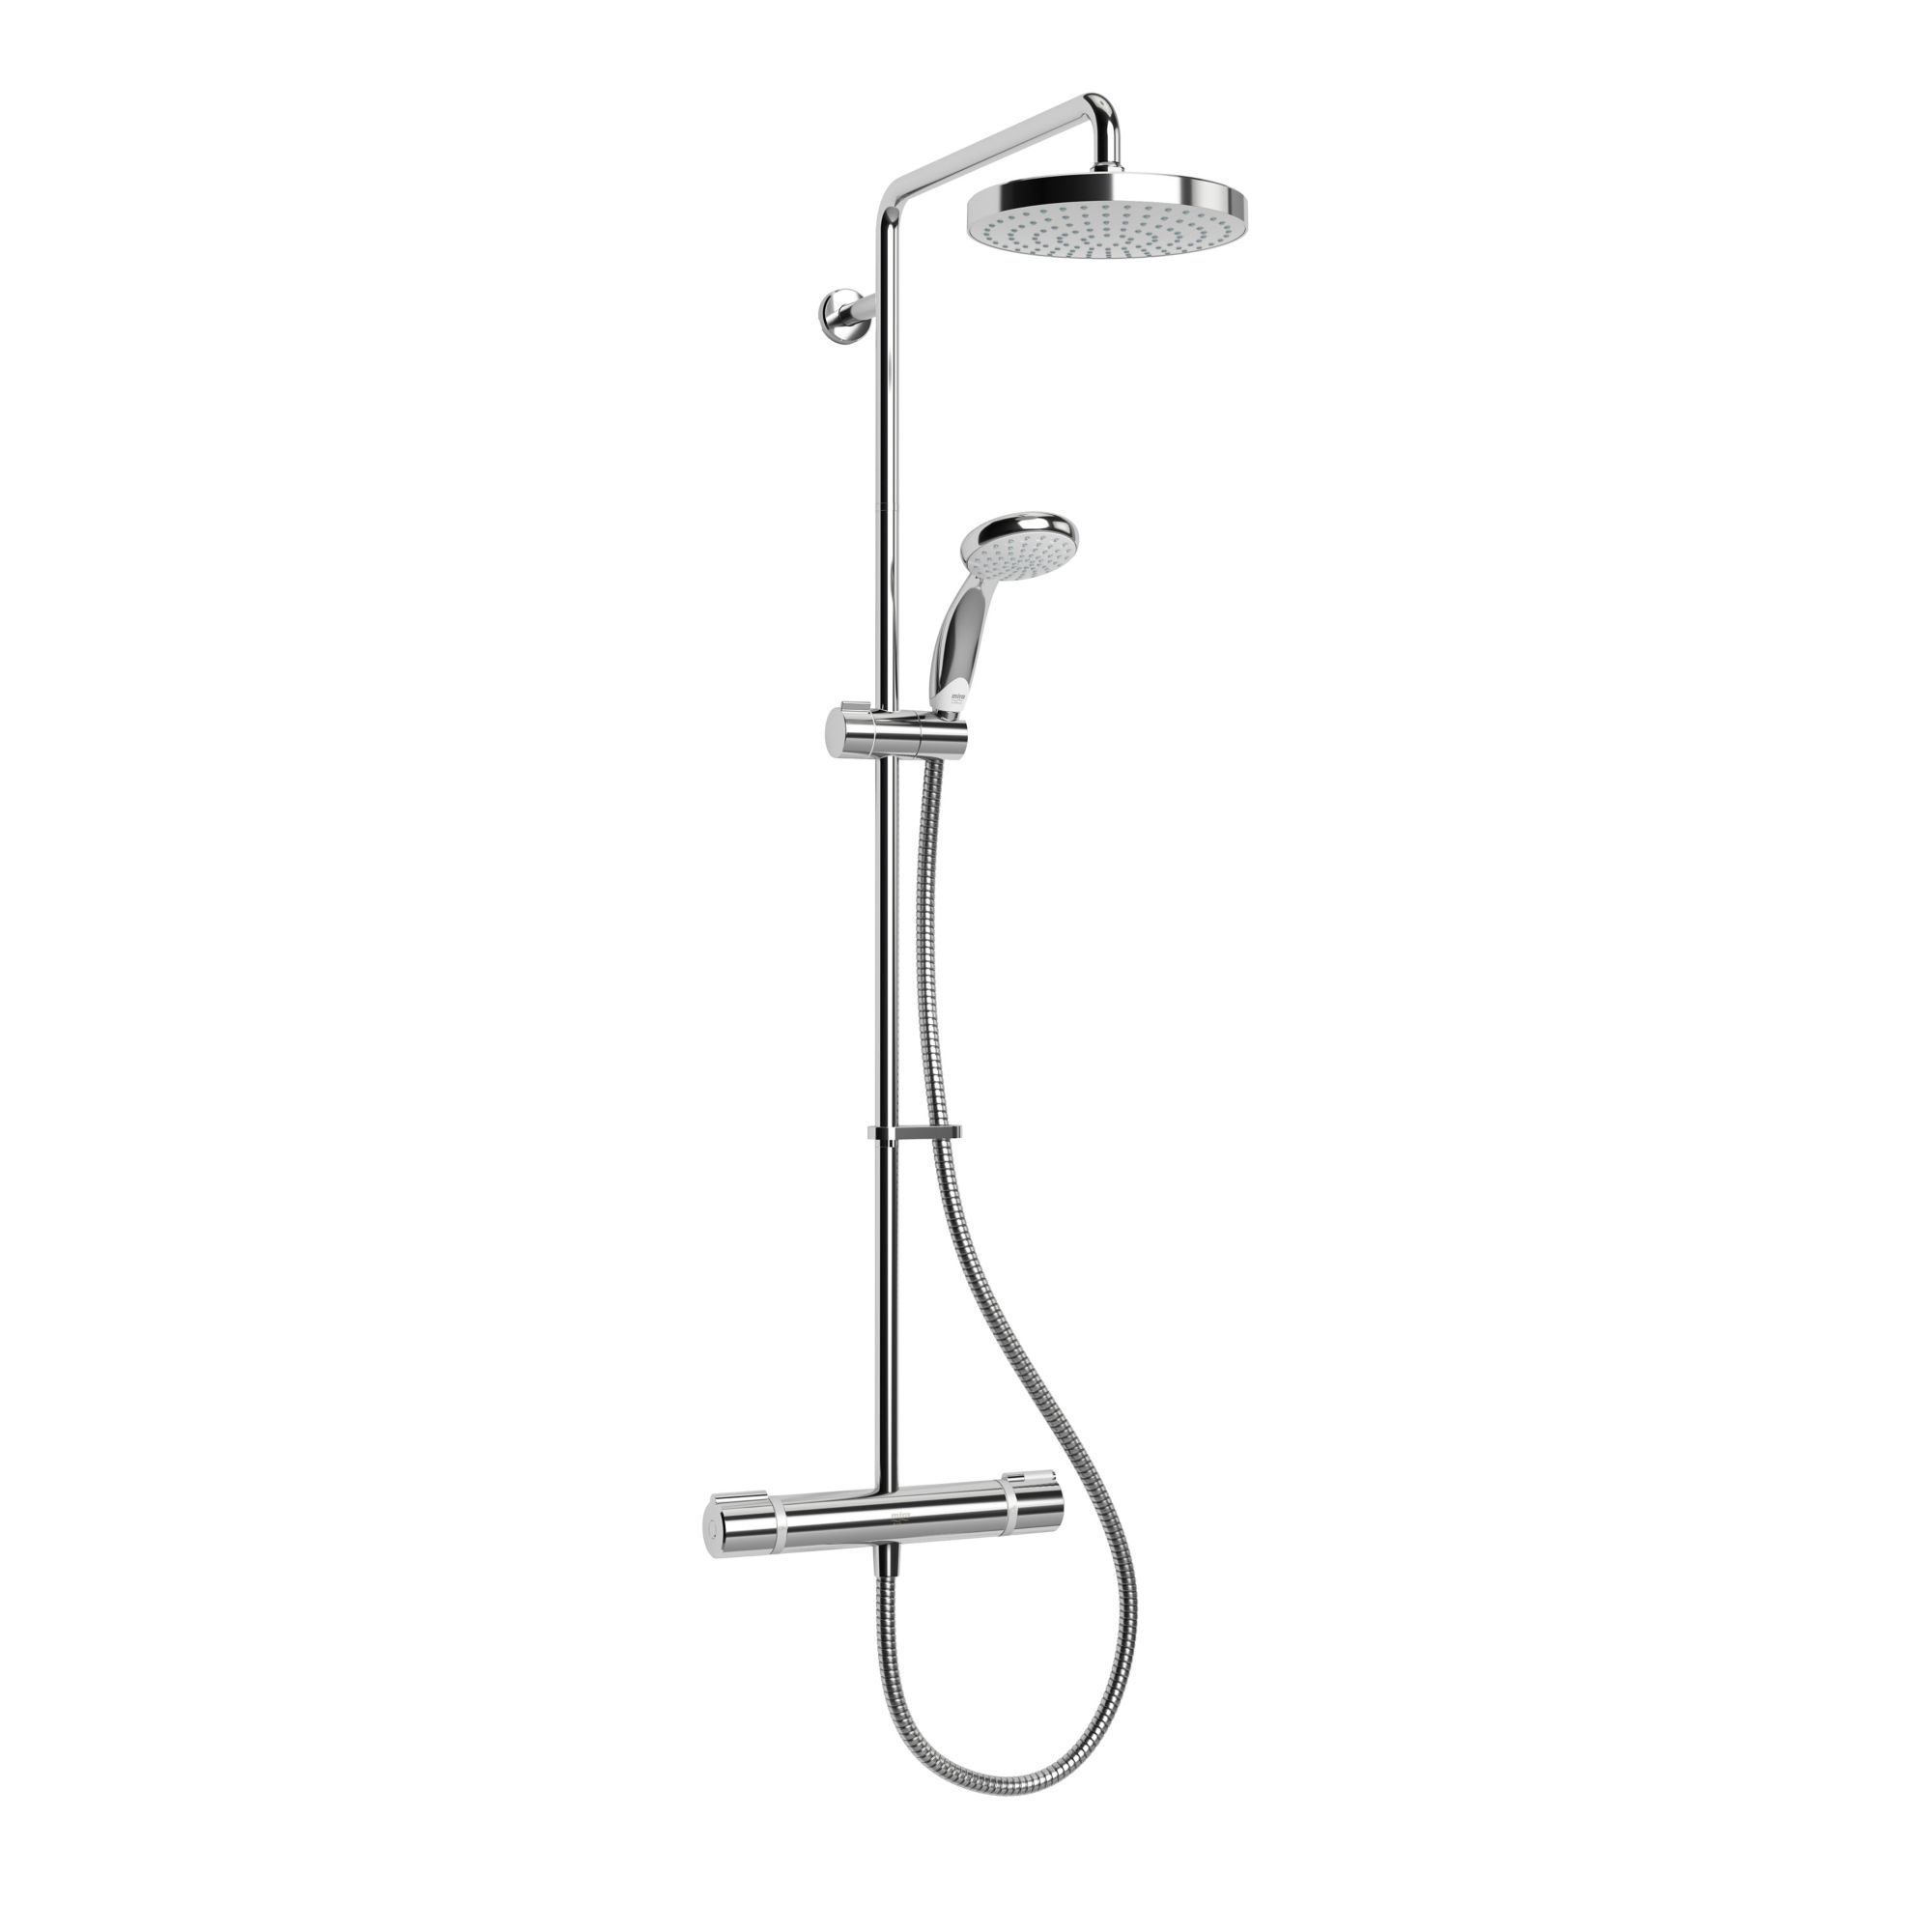 Mira Apt Chrome Effect Thermostatic Bar Mixer Shower Departments